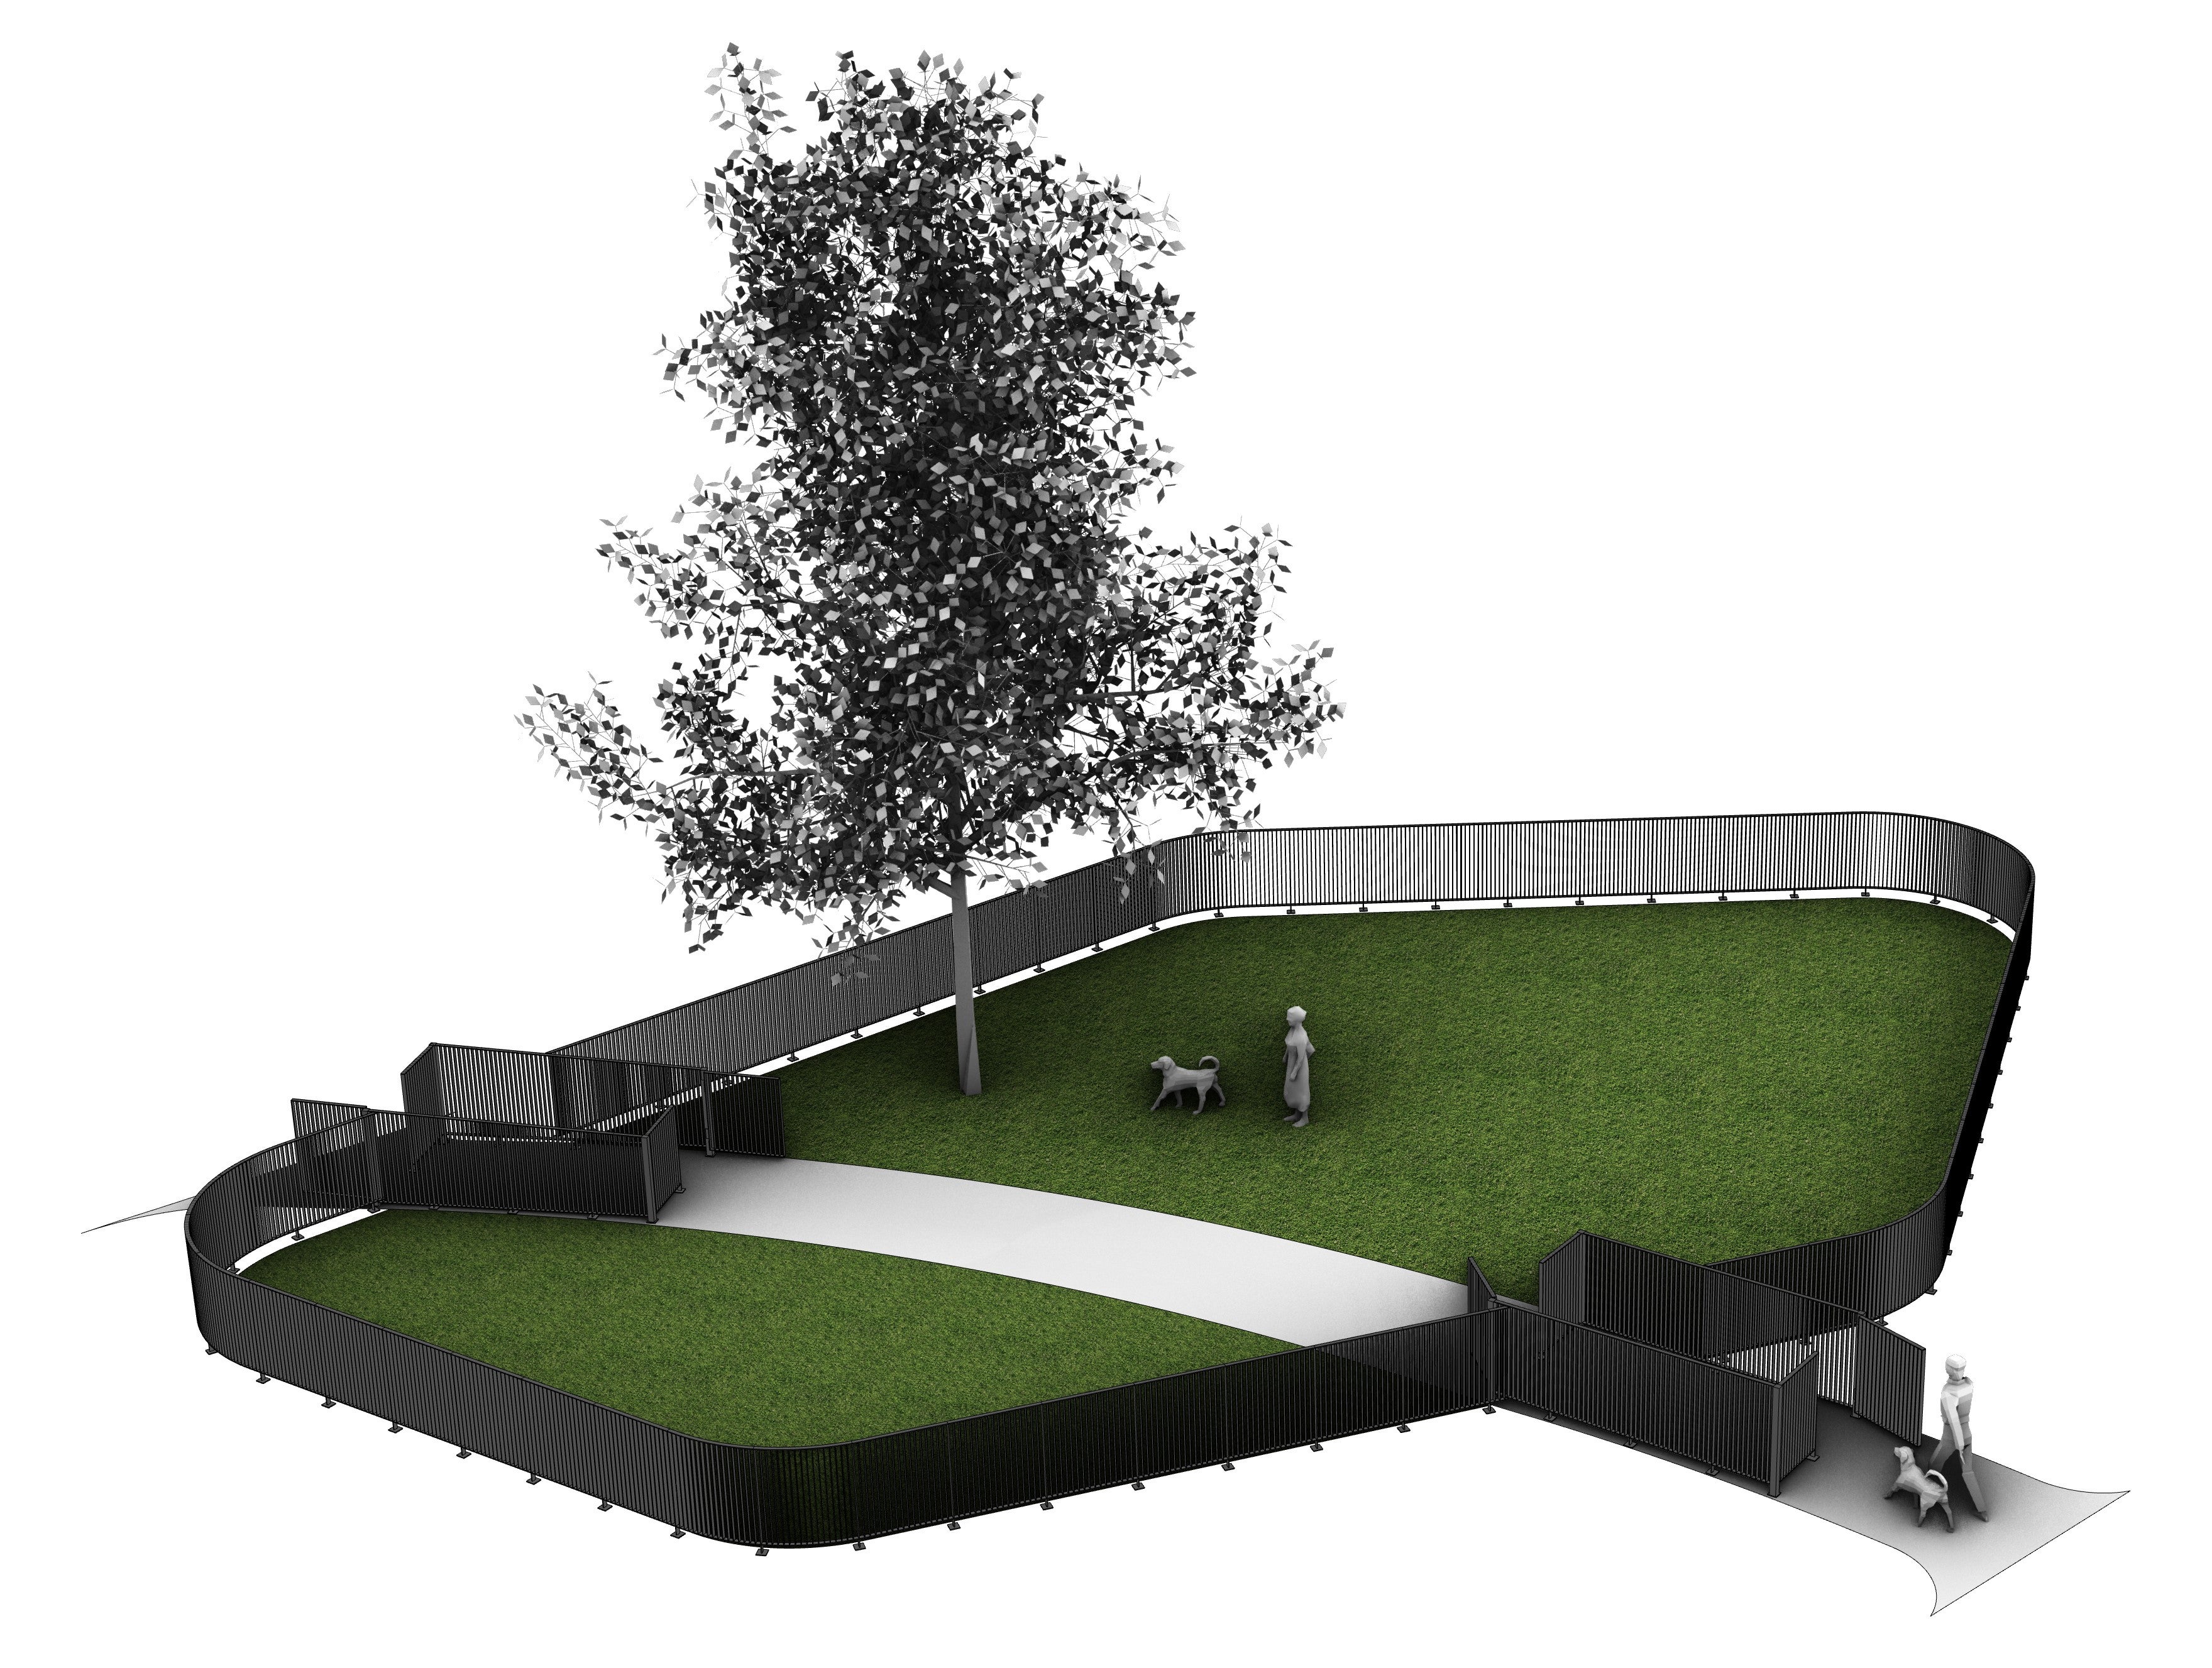 Rendering of the off-leash dog area at Love Park